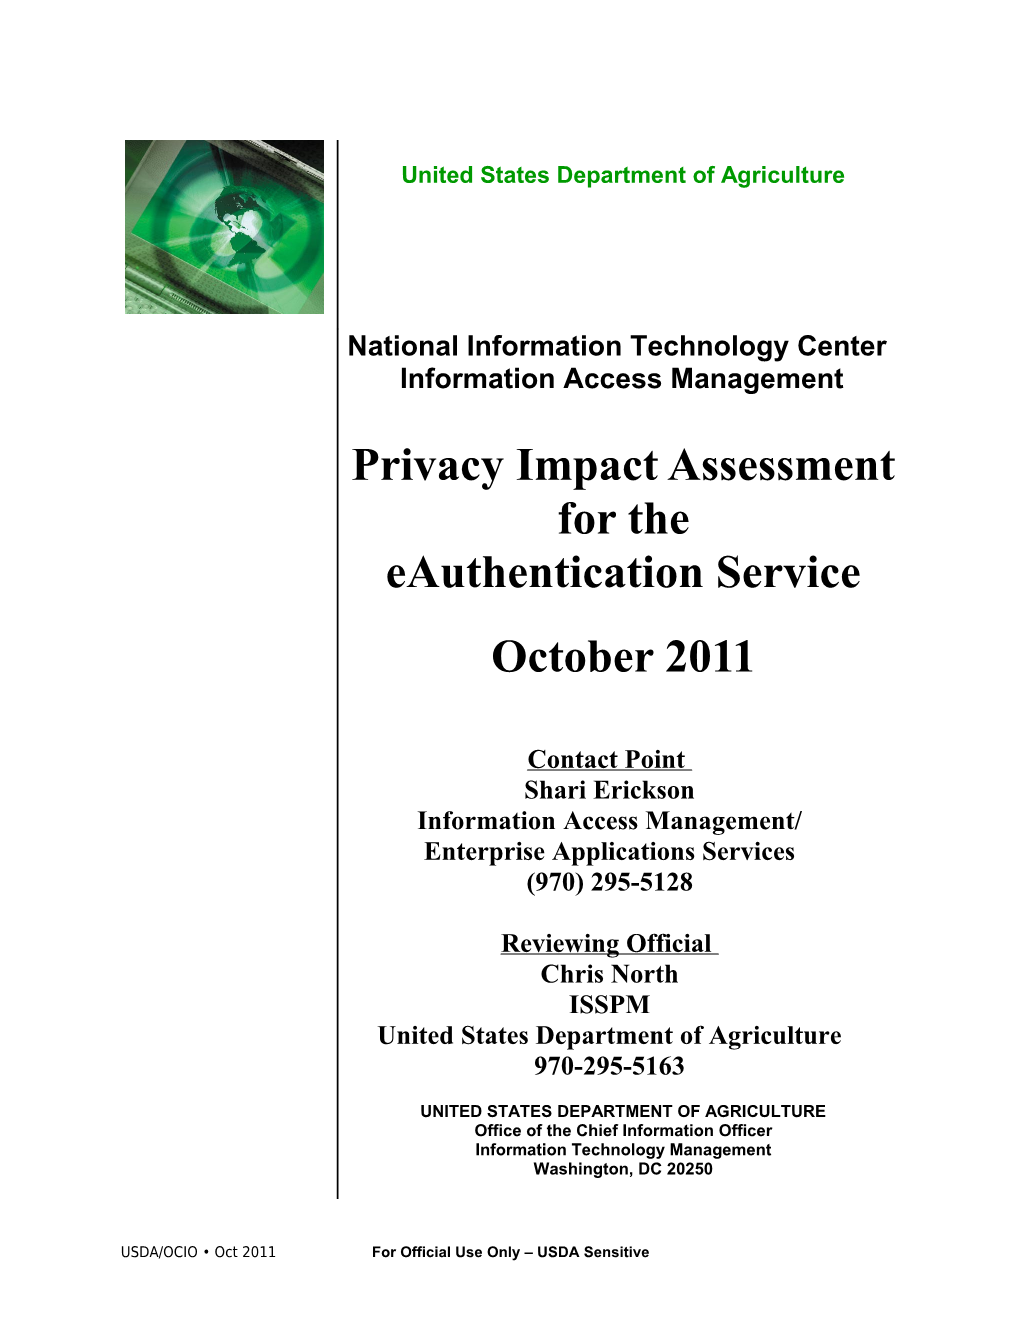 USDA Eauthentication Privacy Impact Assessment